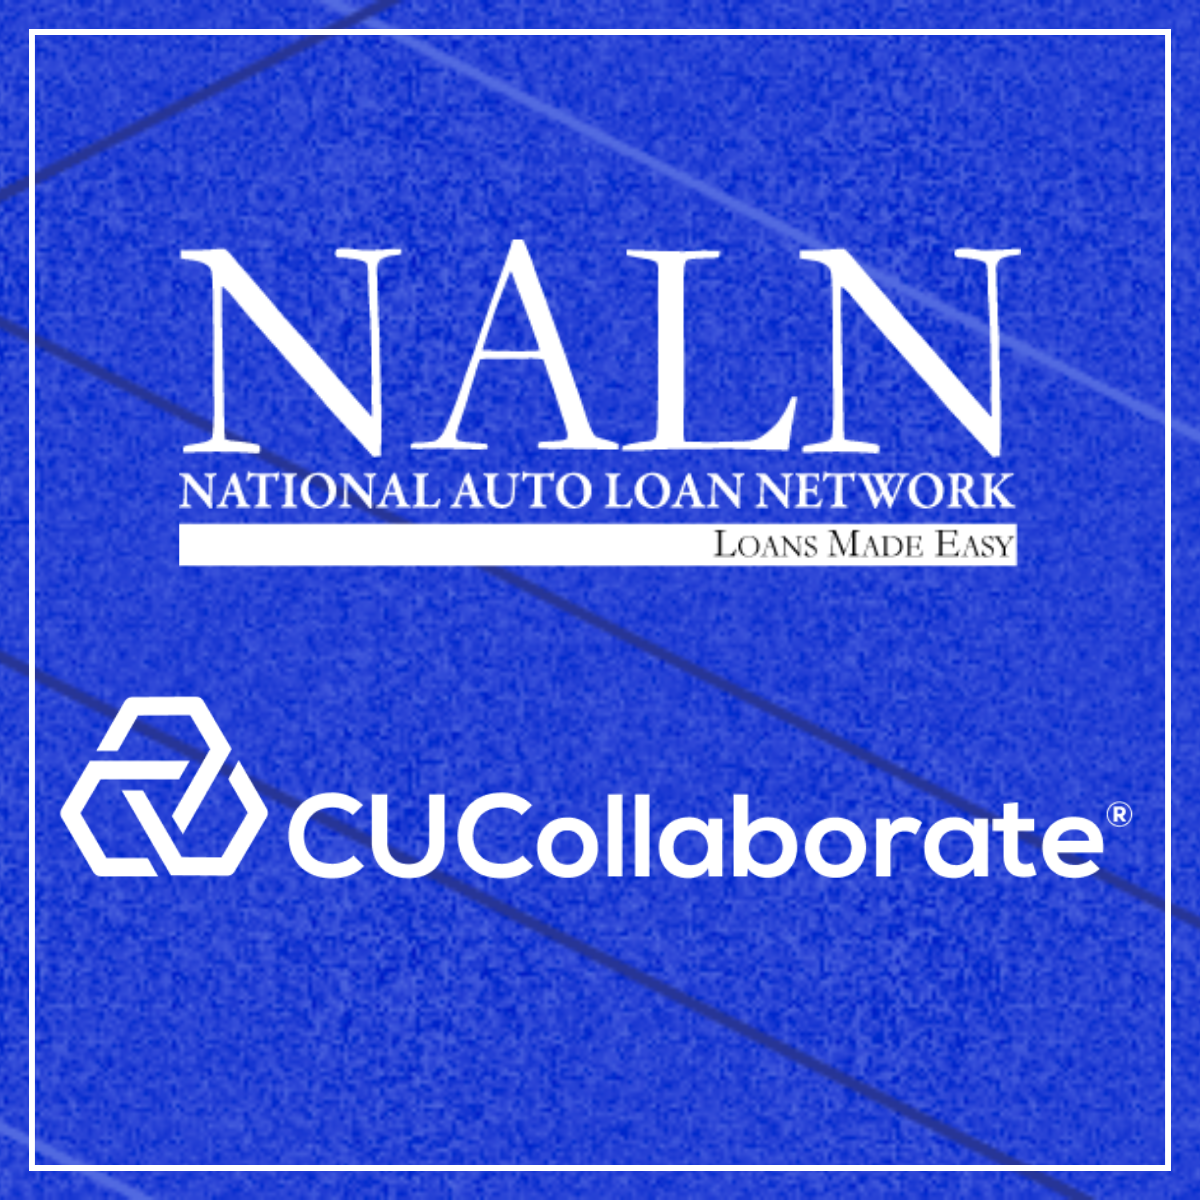 NATIONAL AUTO LOAN NETWORK AND CUCOLLABORATE PARTNER